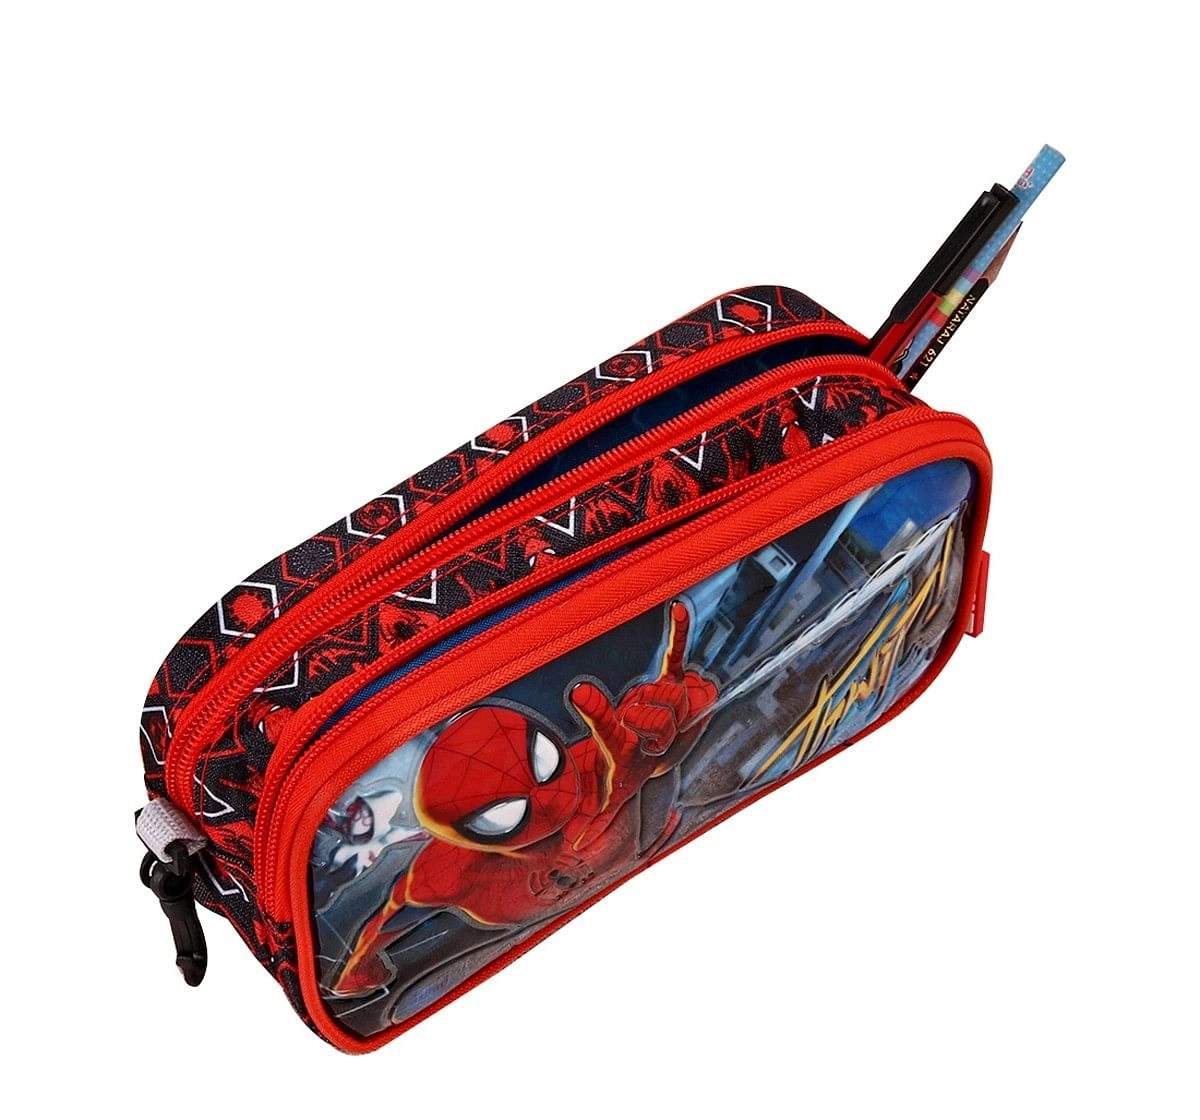 Marvel Spiderman Red Double Zip Pouch Red 3Y+